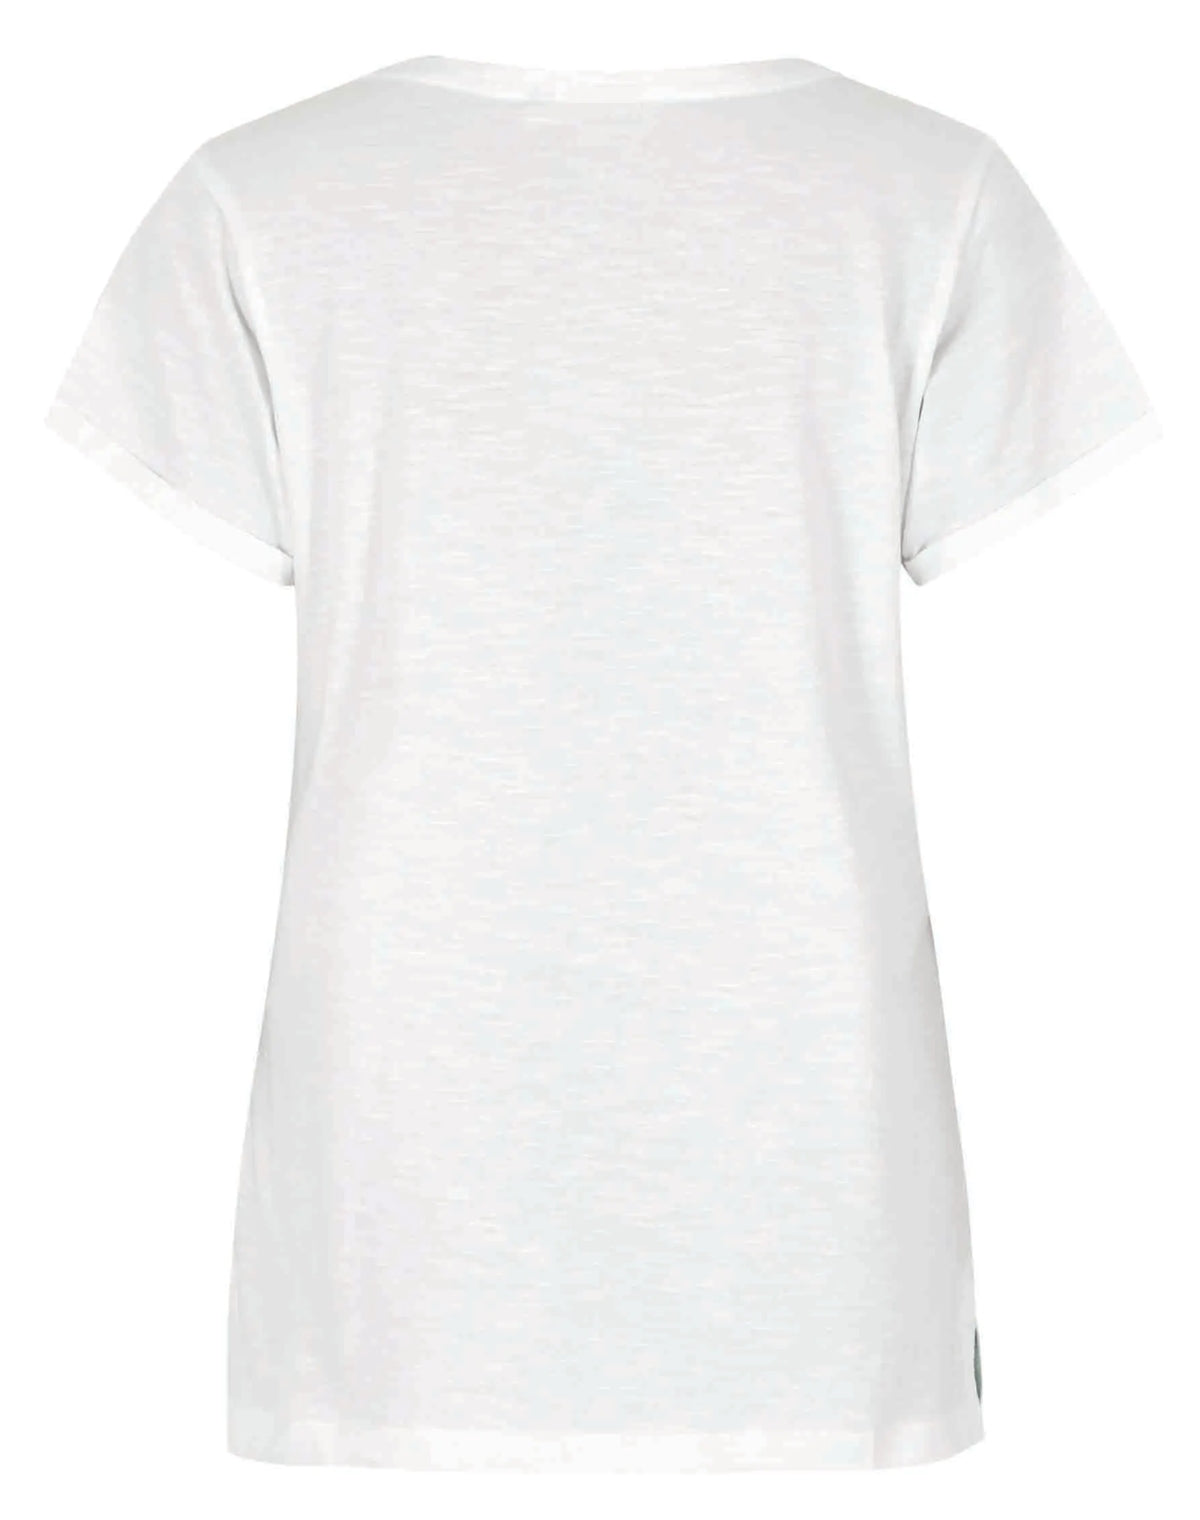 Women's Wild Swimmmers pocket print tee from Weird Fish in White.